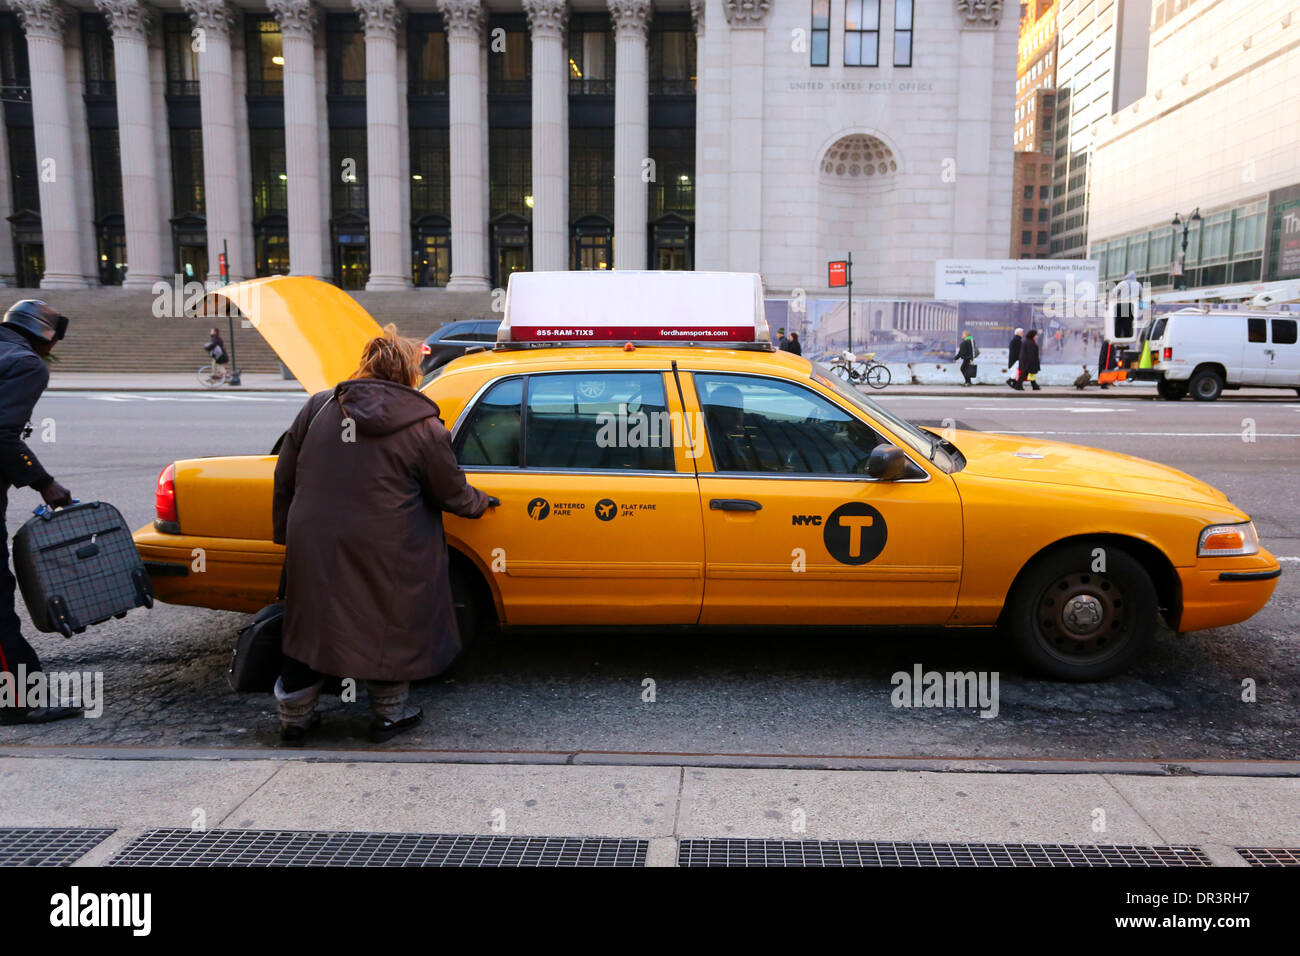 A person getting into a taxi in New York City Stock Photo